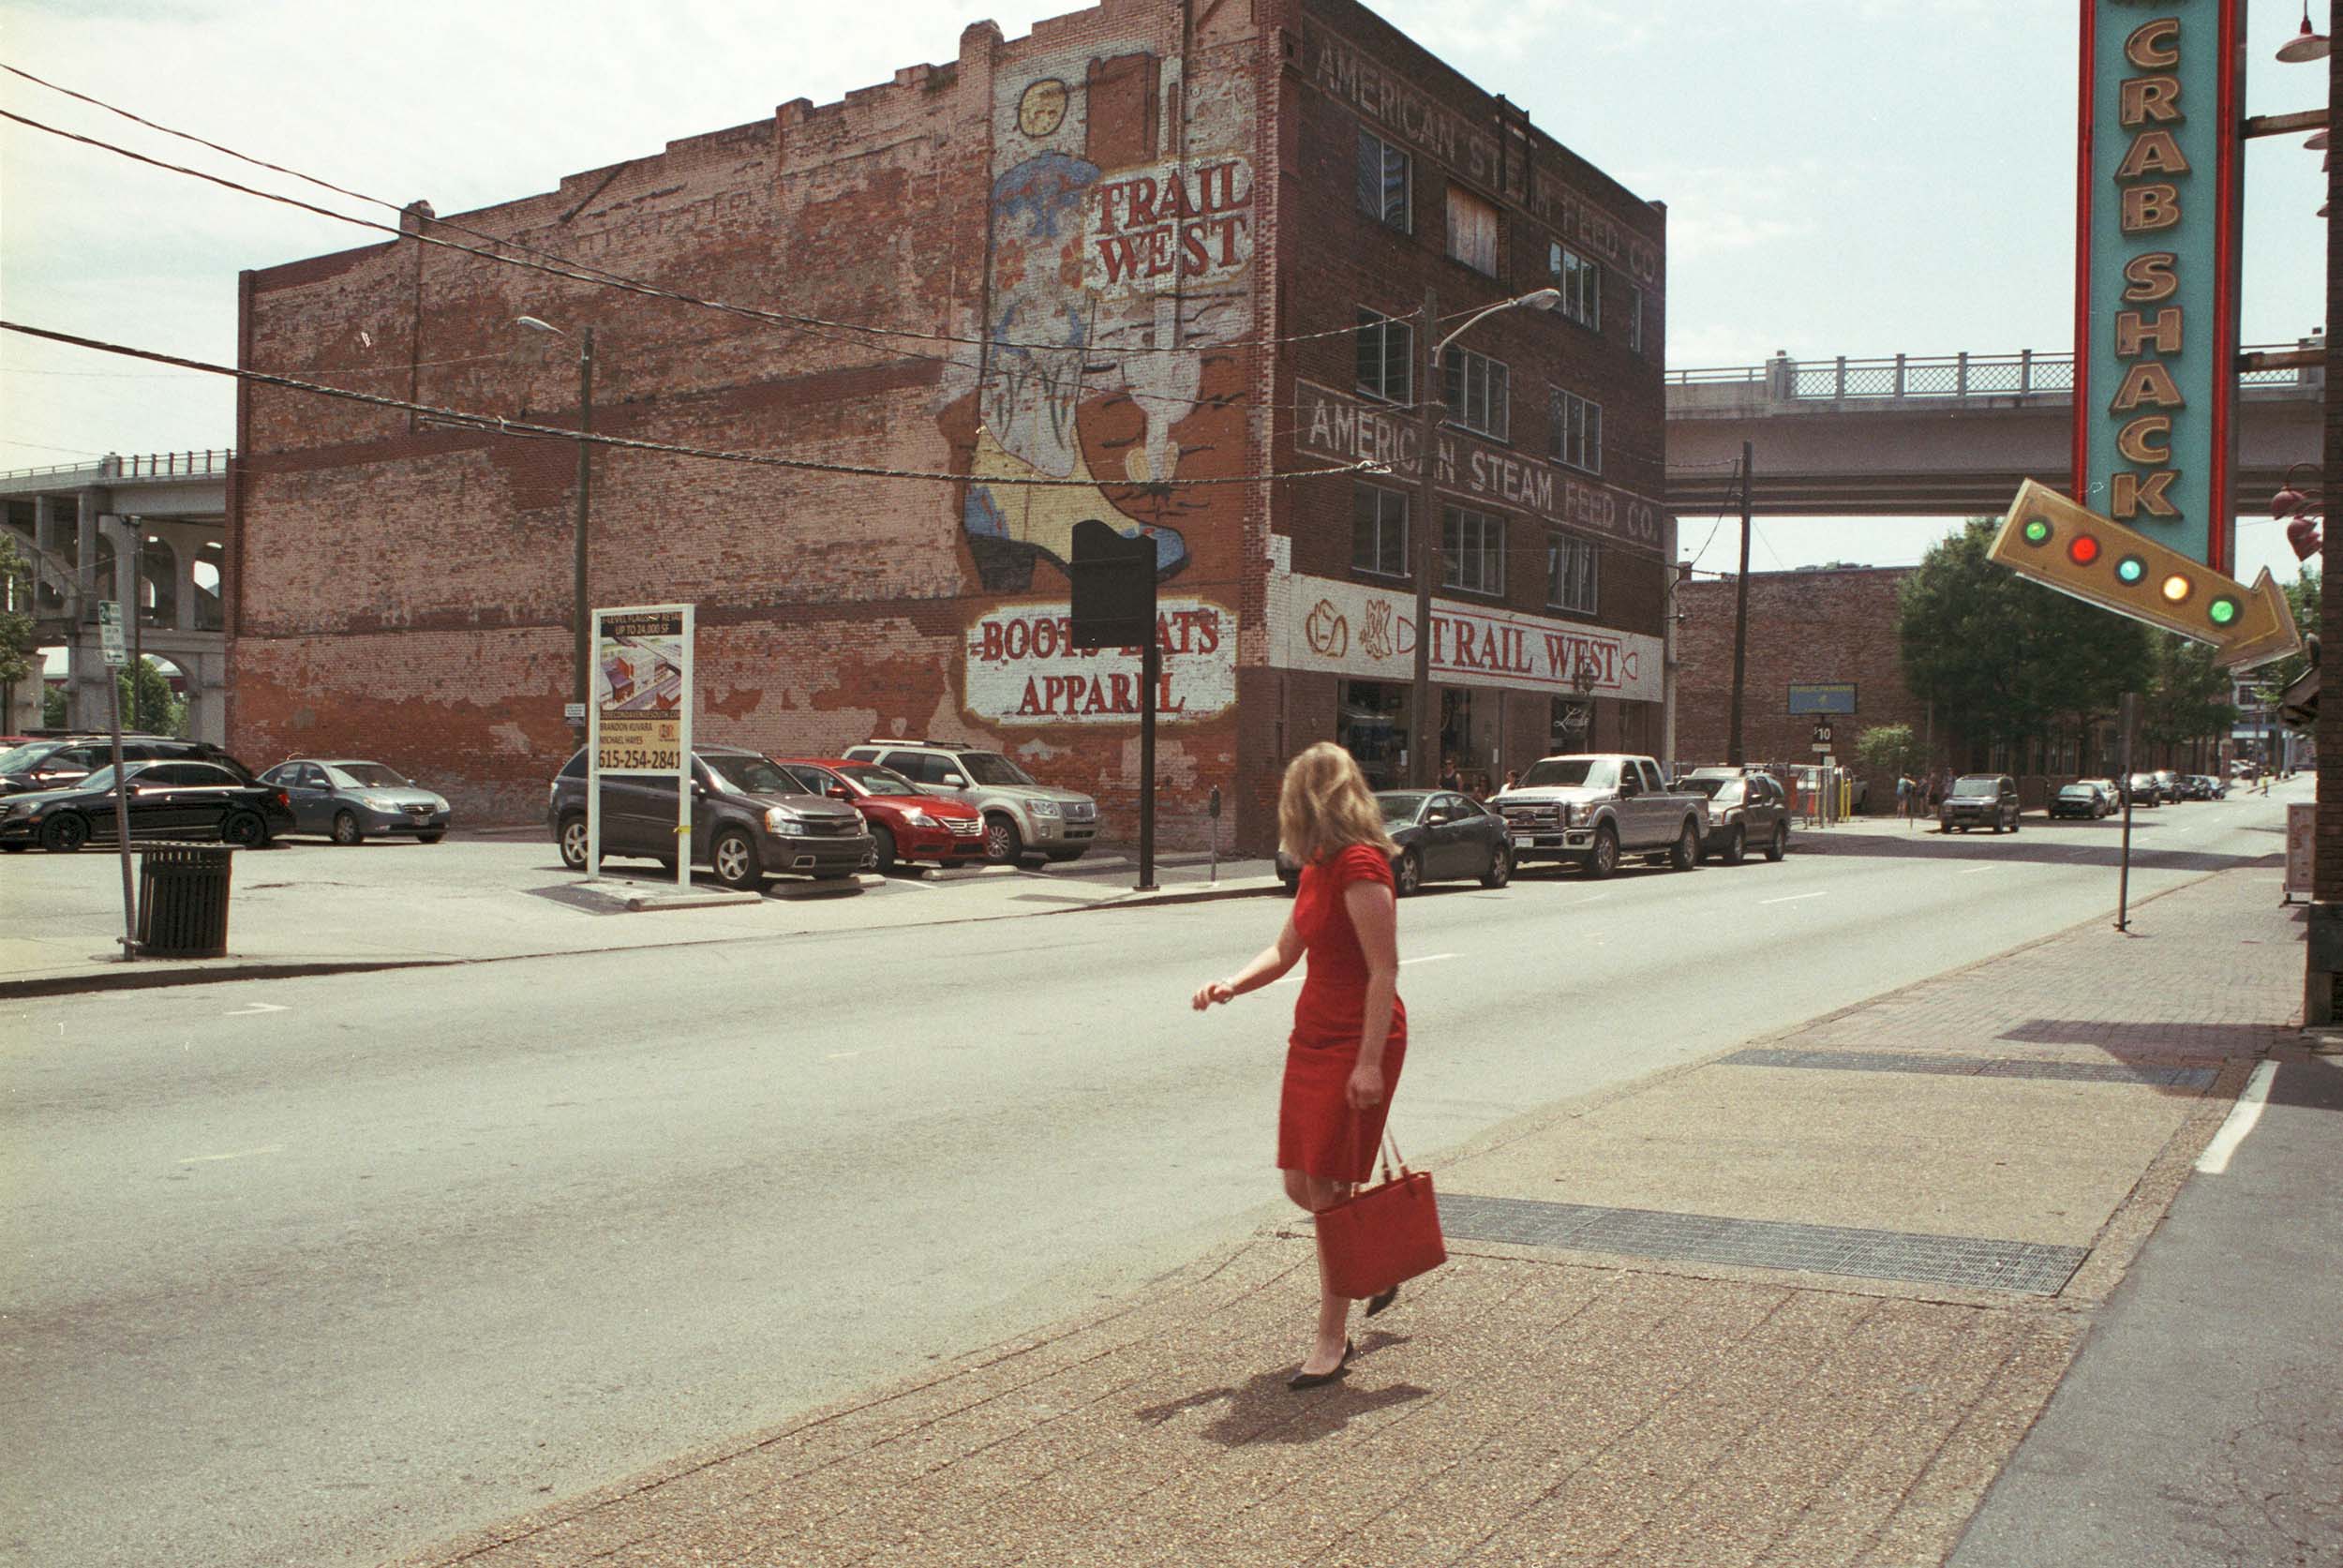  Woman in a Red Dress | Nashville, Tennessee 2015 